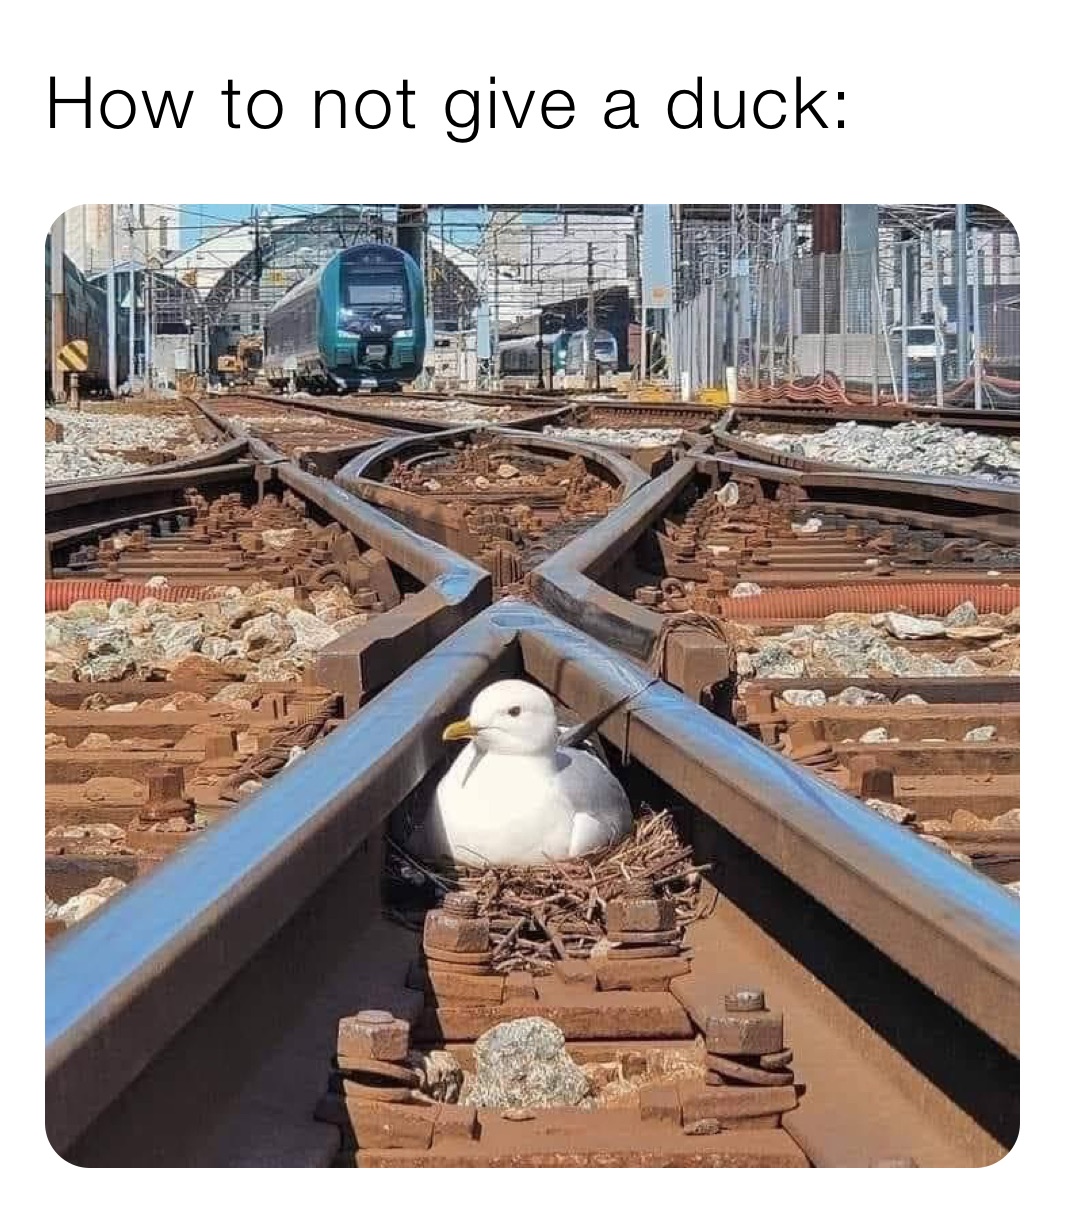 How to not give a duck: